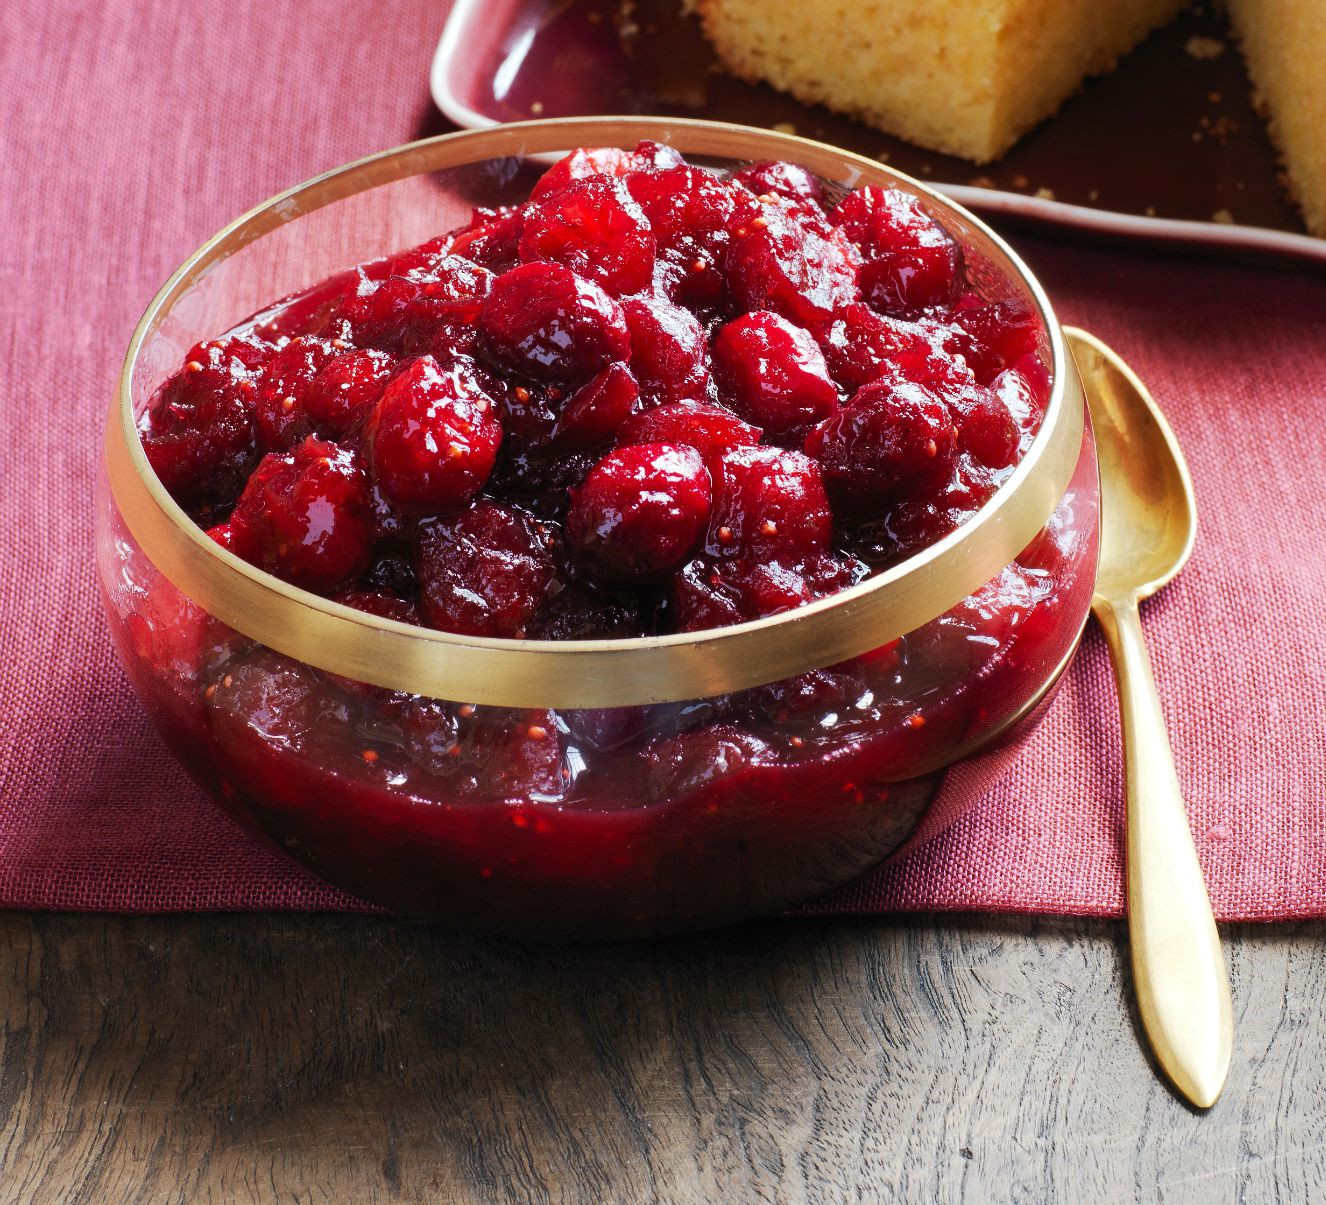 Cranberry Recipes For Thanksgiving
 25 Best Cranberry Sauce Recipes How To Make Homemade